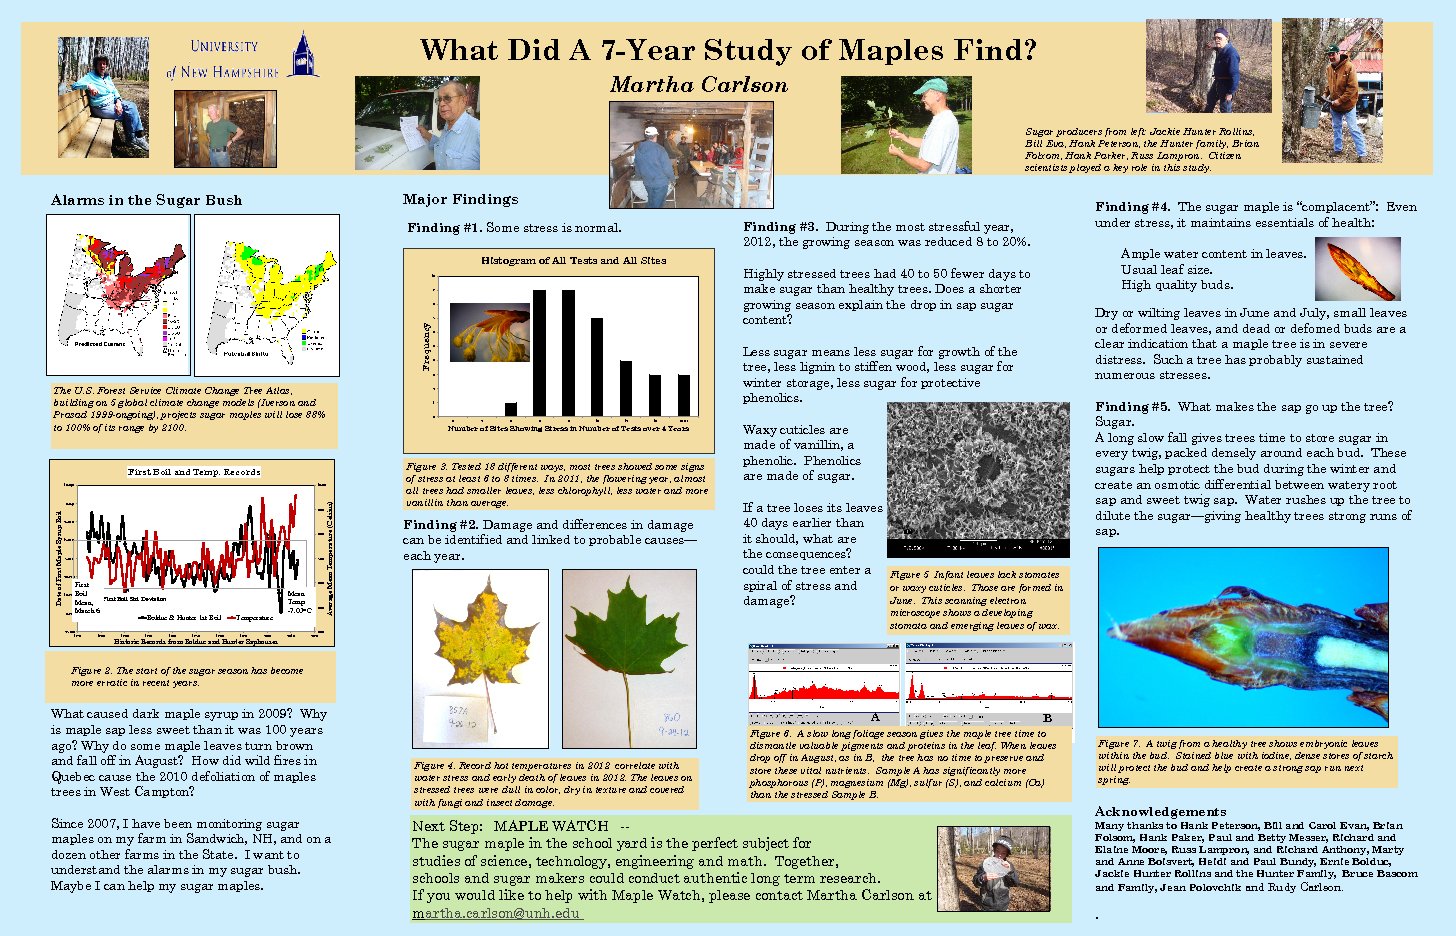 Findings Of A 7-Year Maple Study by mrg39